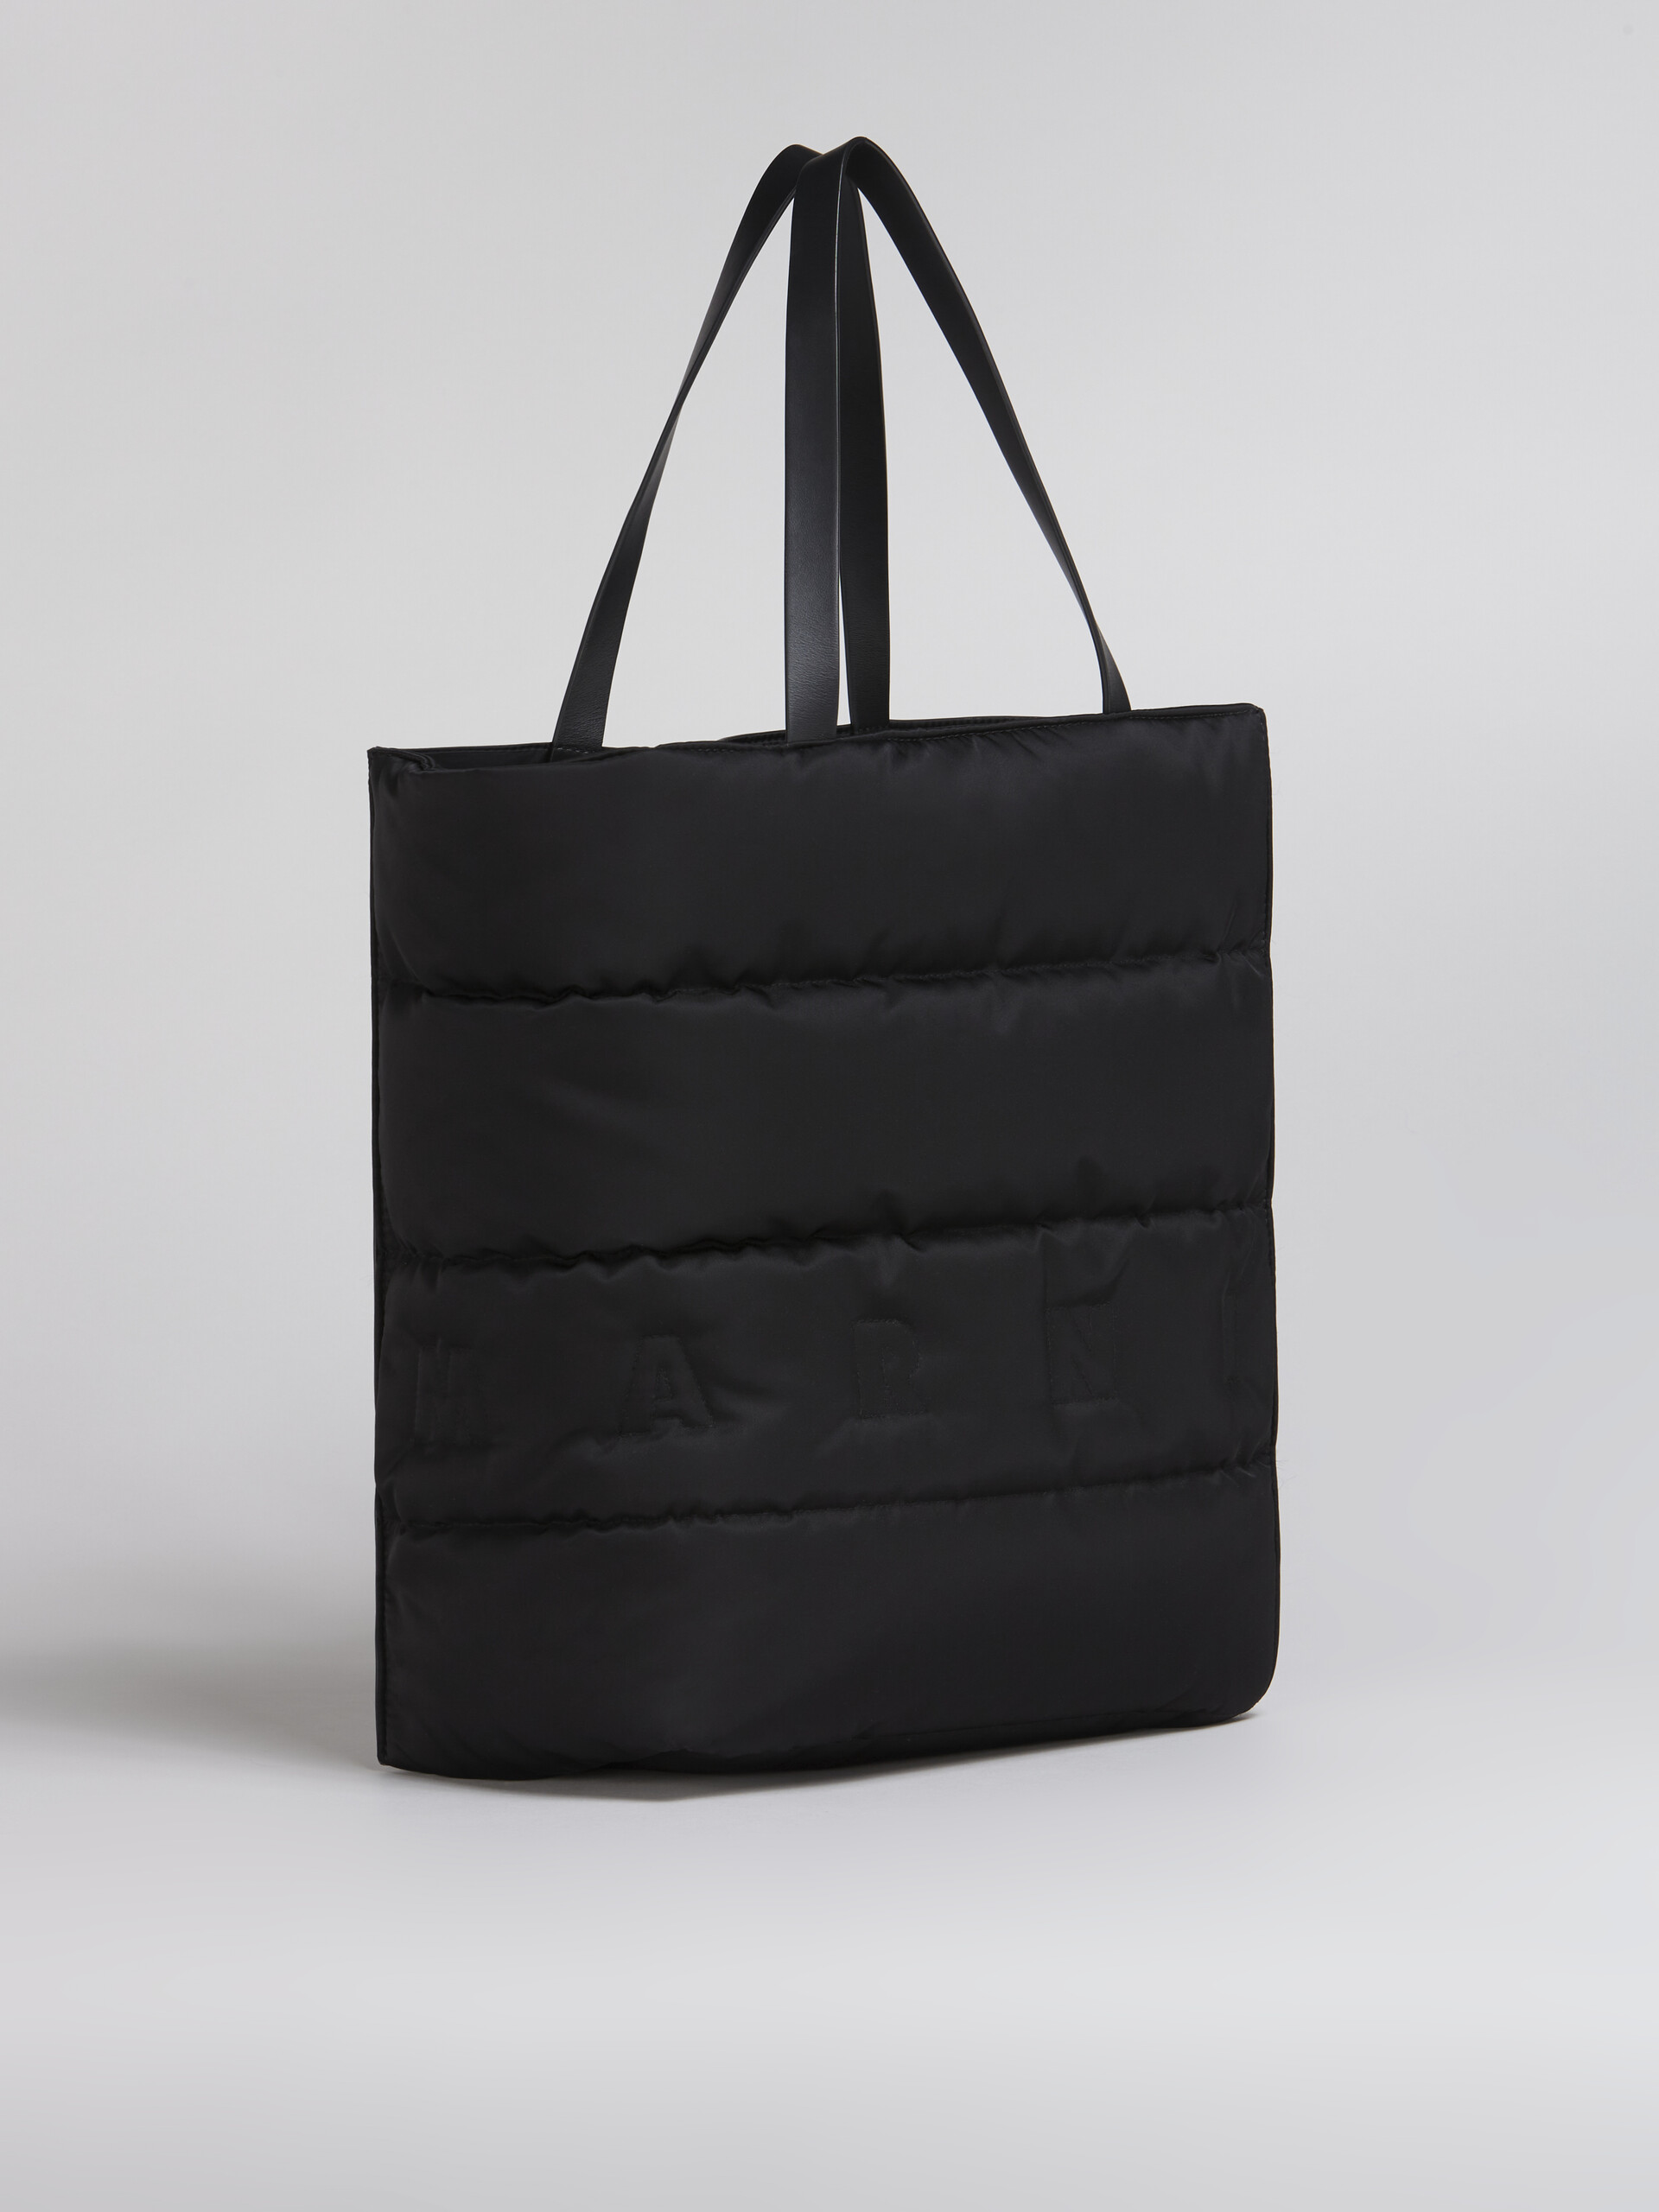 Black MUSEO SOFT tote bag in quilted nylon - Shopping Bags - Image 6